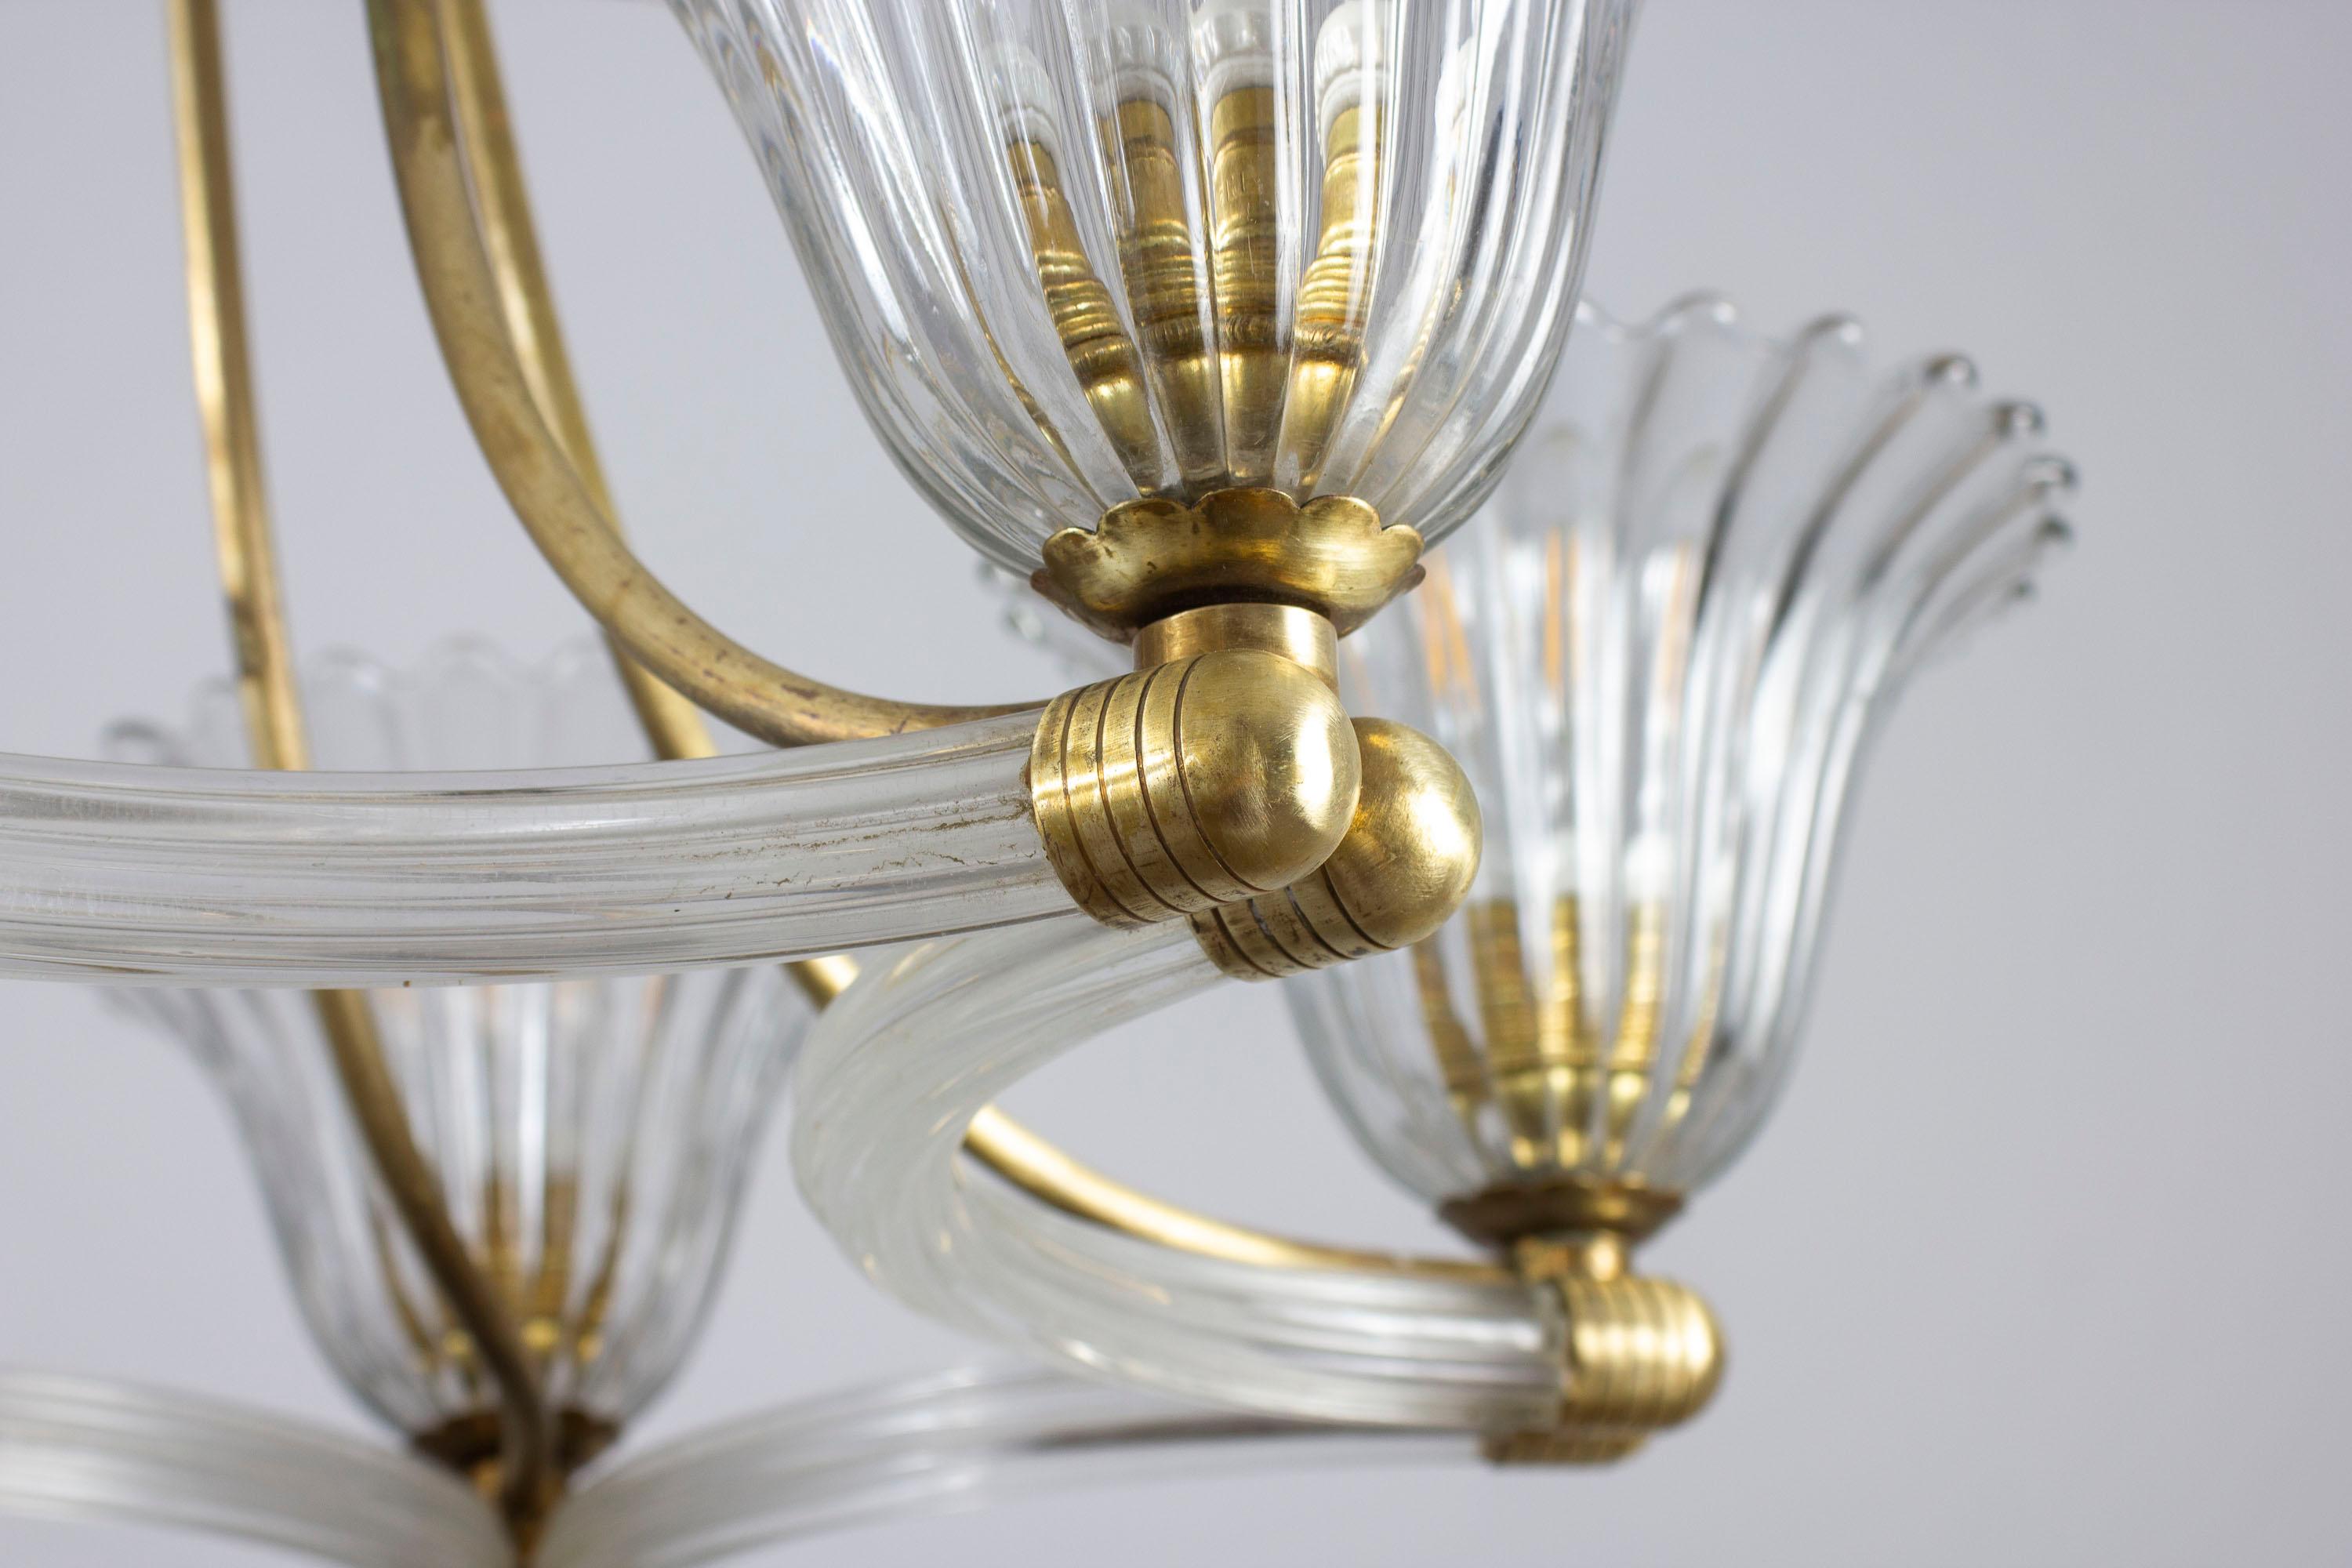  Art Deco Brass Mounted Murano Glass Chandelier by Ercole Barovier 1940 For Sale 2